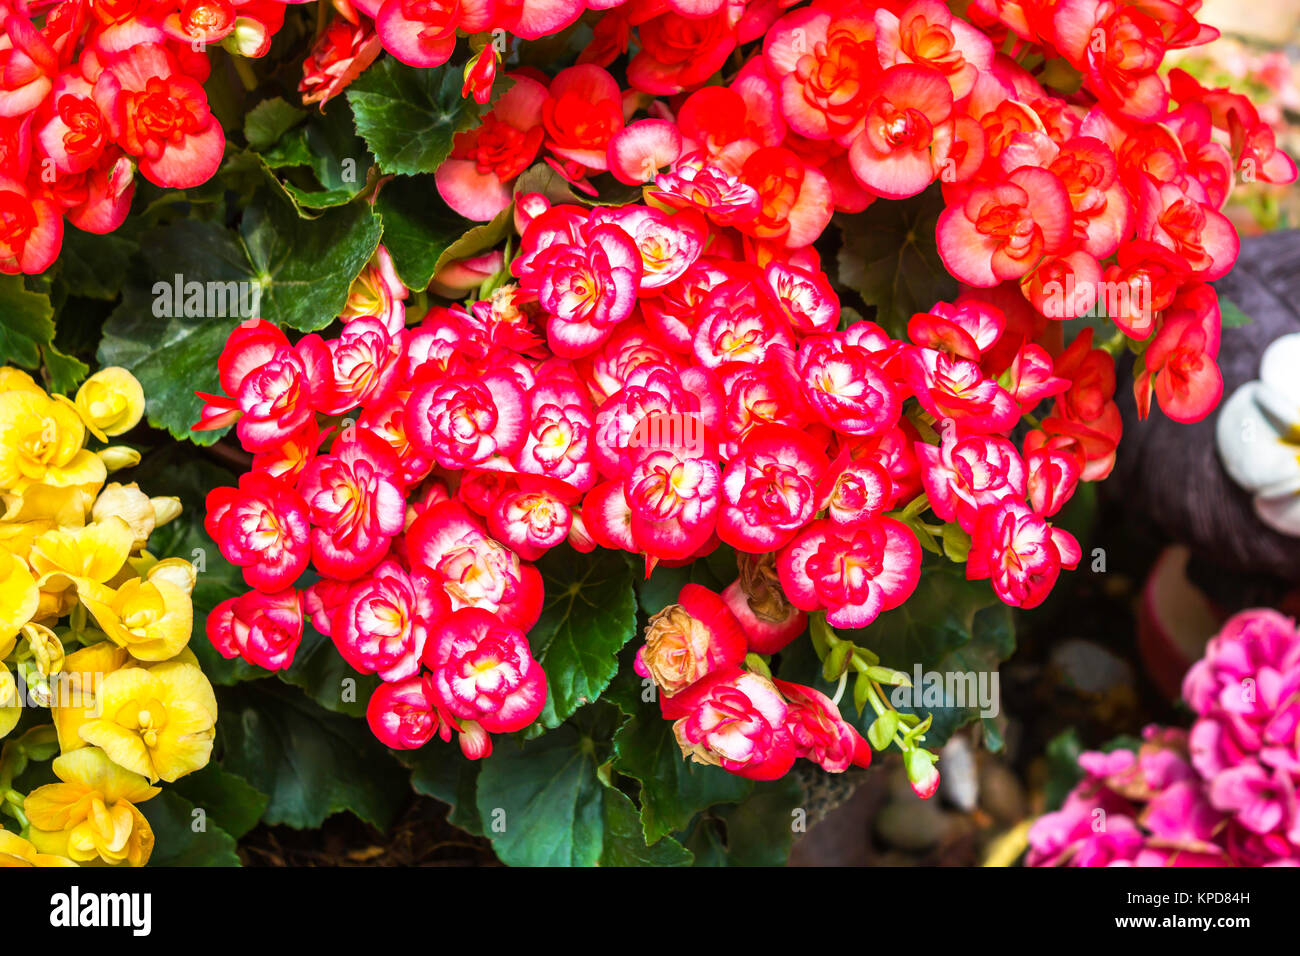 Colorful of red and yellow flowers Stock Photo